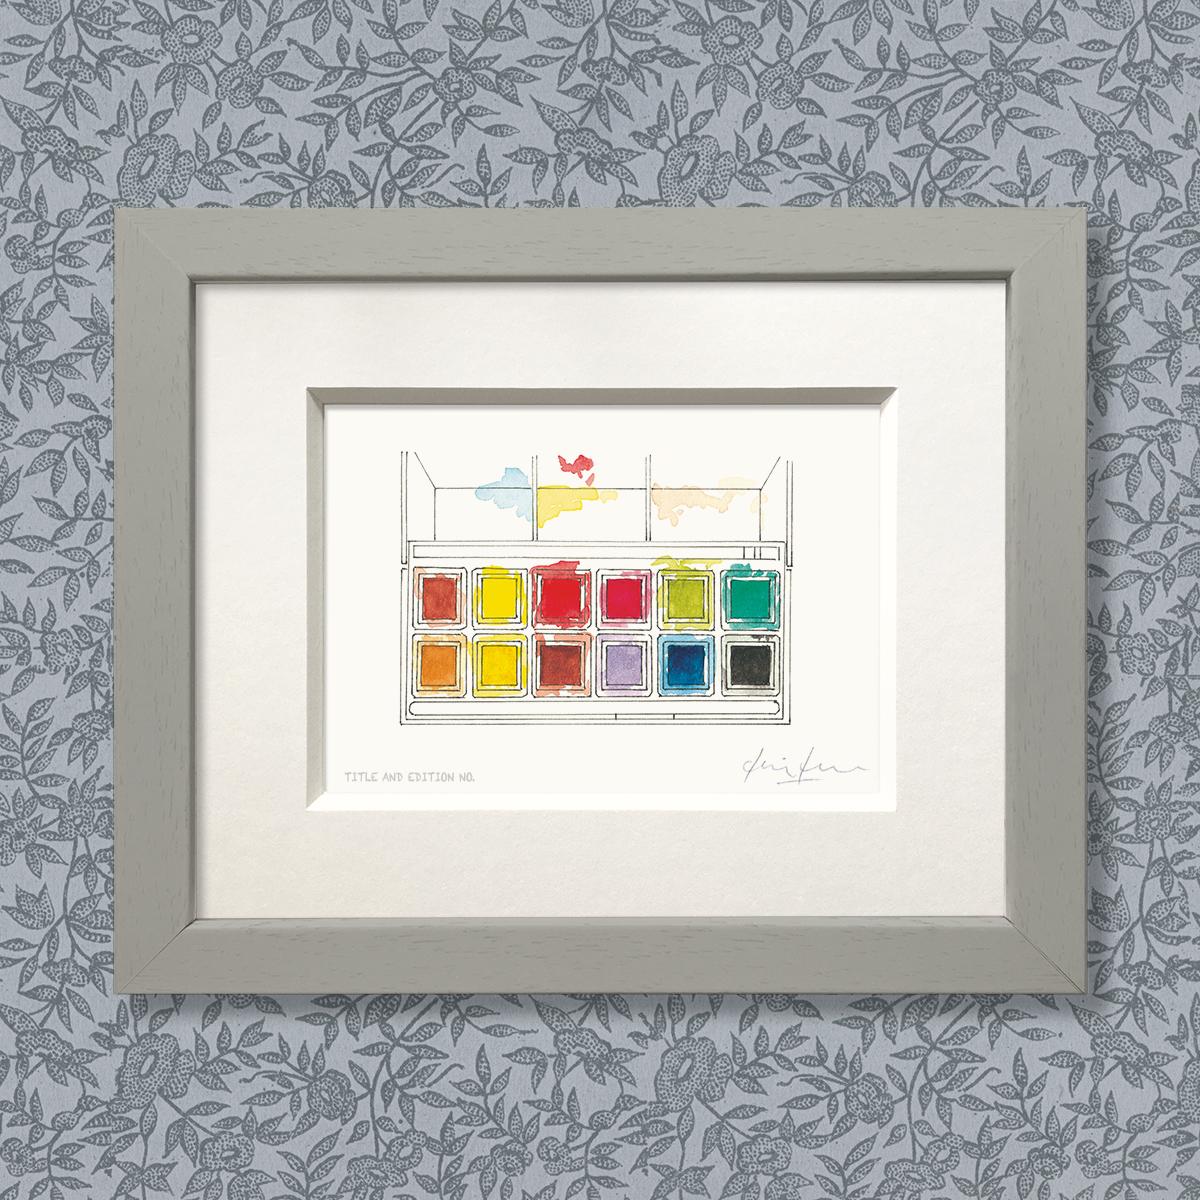 Limited edition print from pen, ink and watercolour sketch of a paint box in a grey frame